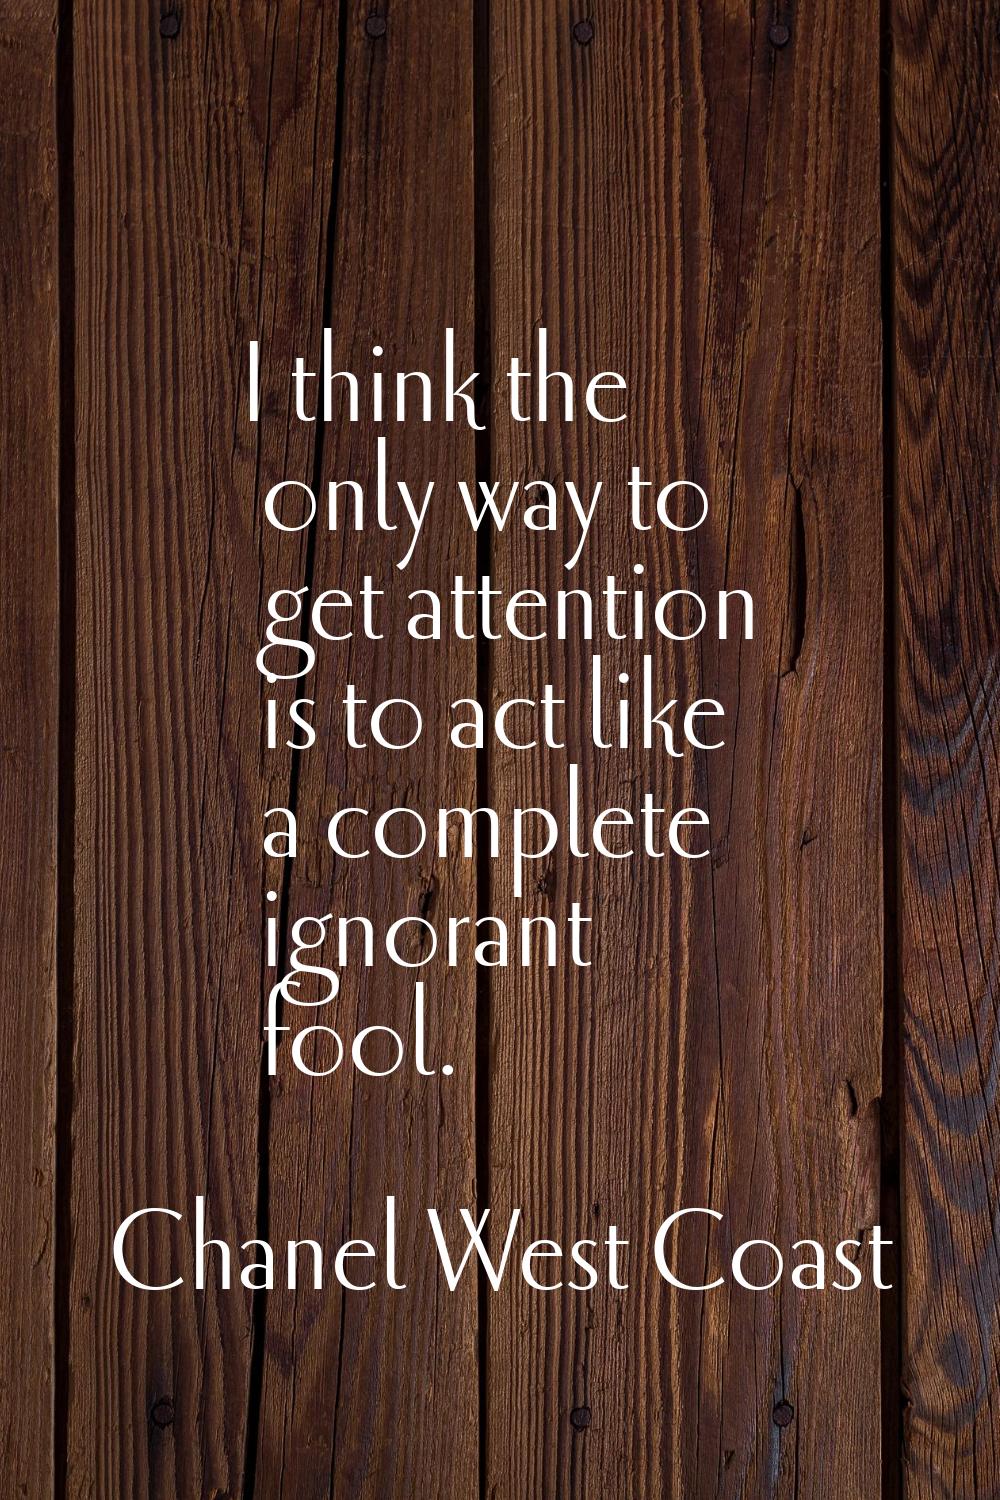 I think the only way to get attention is to act like a complete ignorant fool.